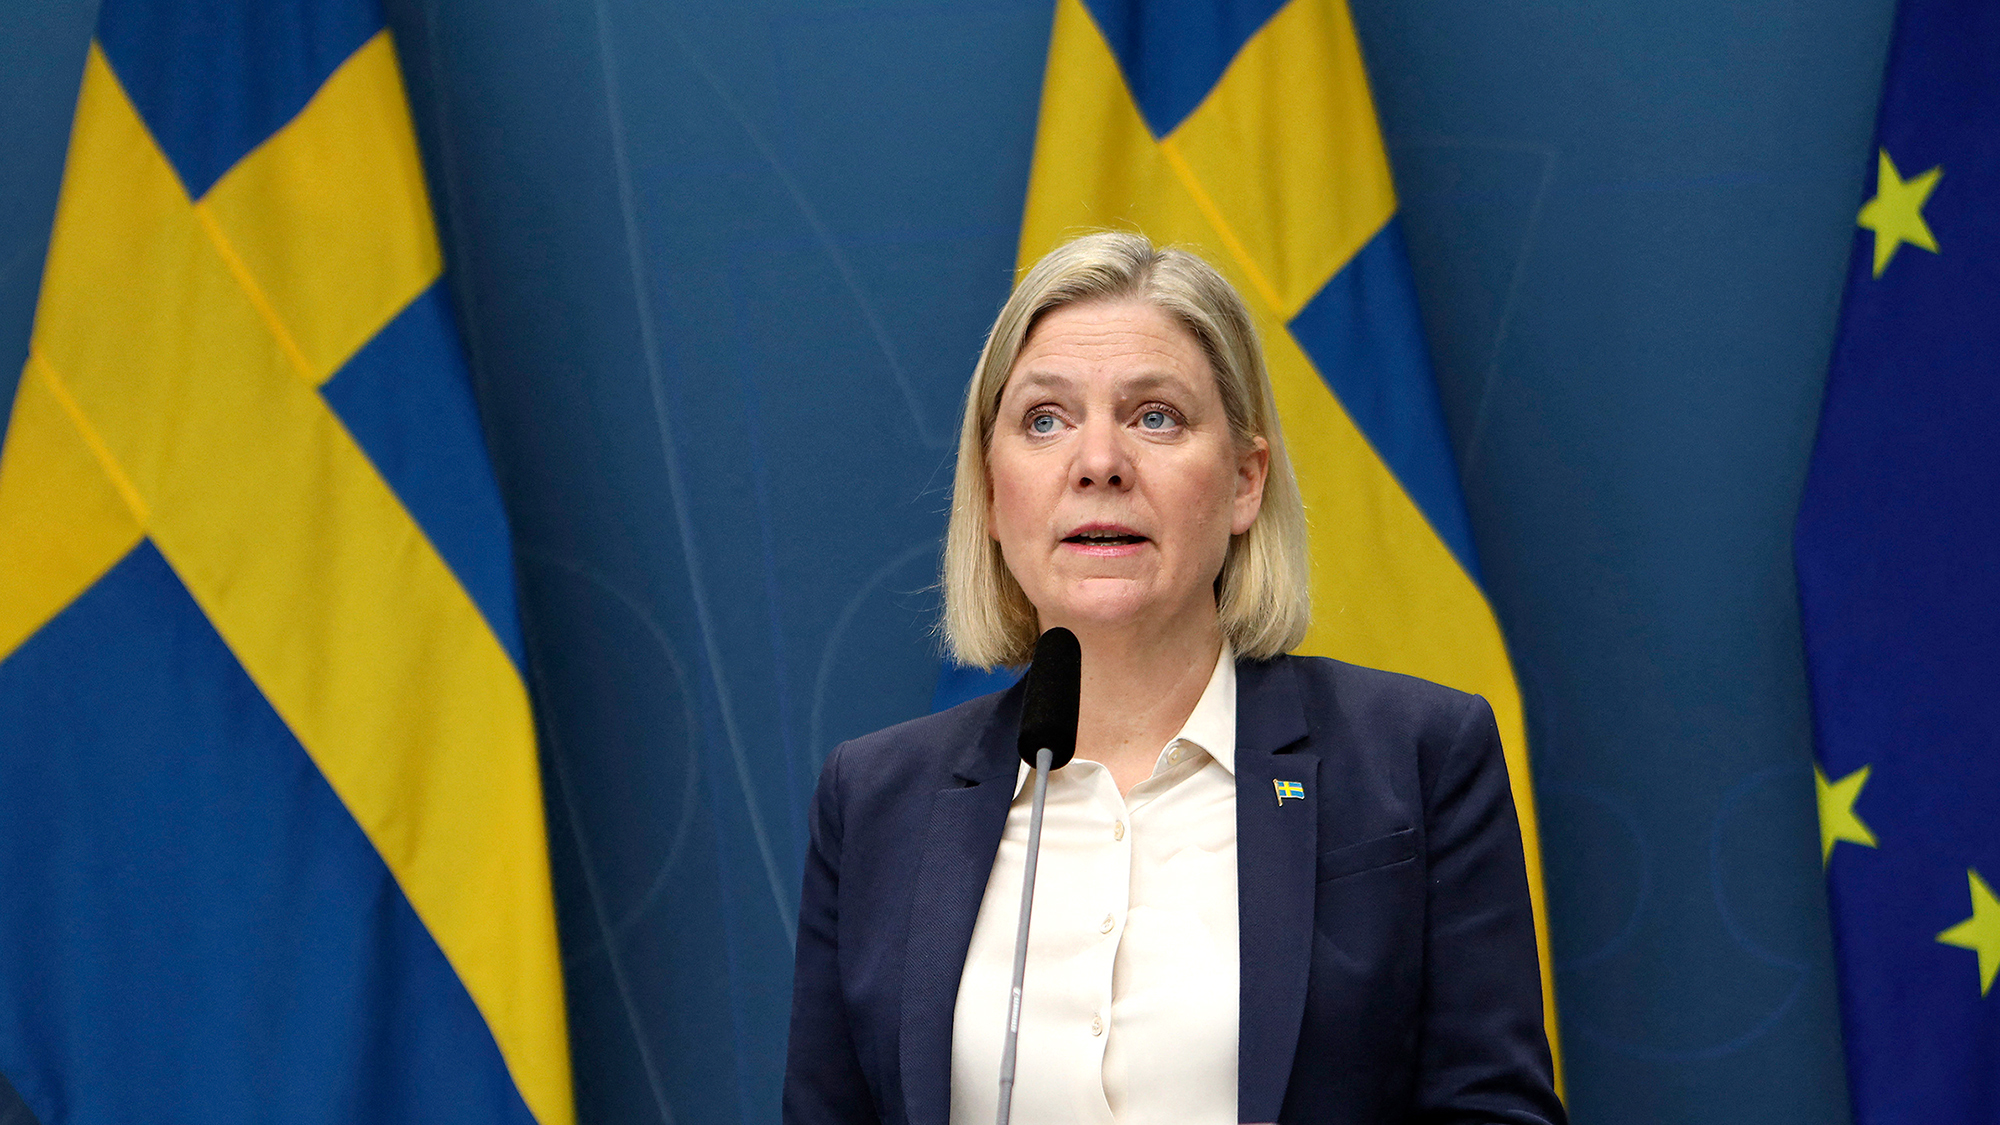 Swedish Prime Minister Magdalena Andersson conducts a press conference in Stockholm, Sweden, on February 27.